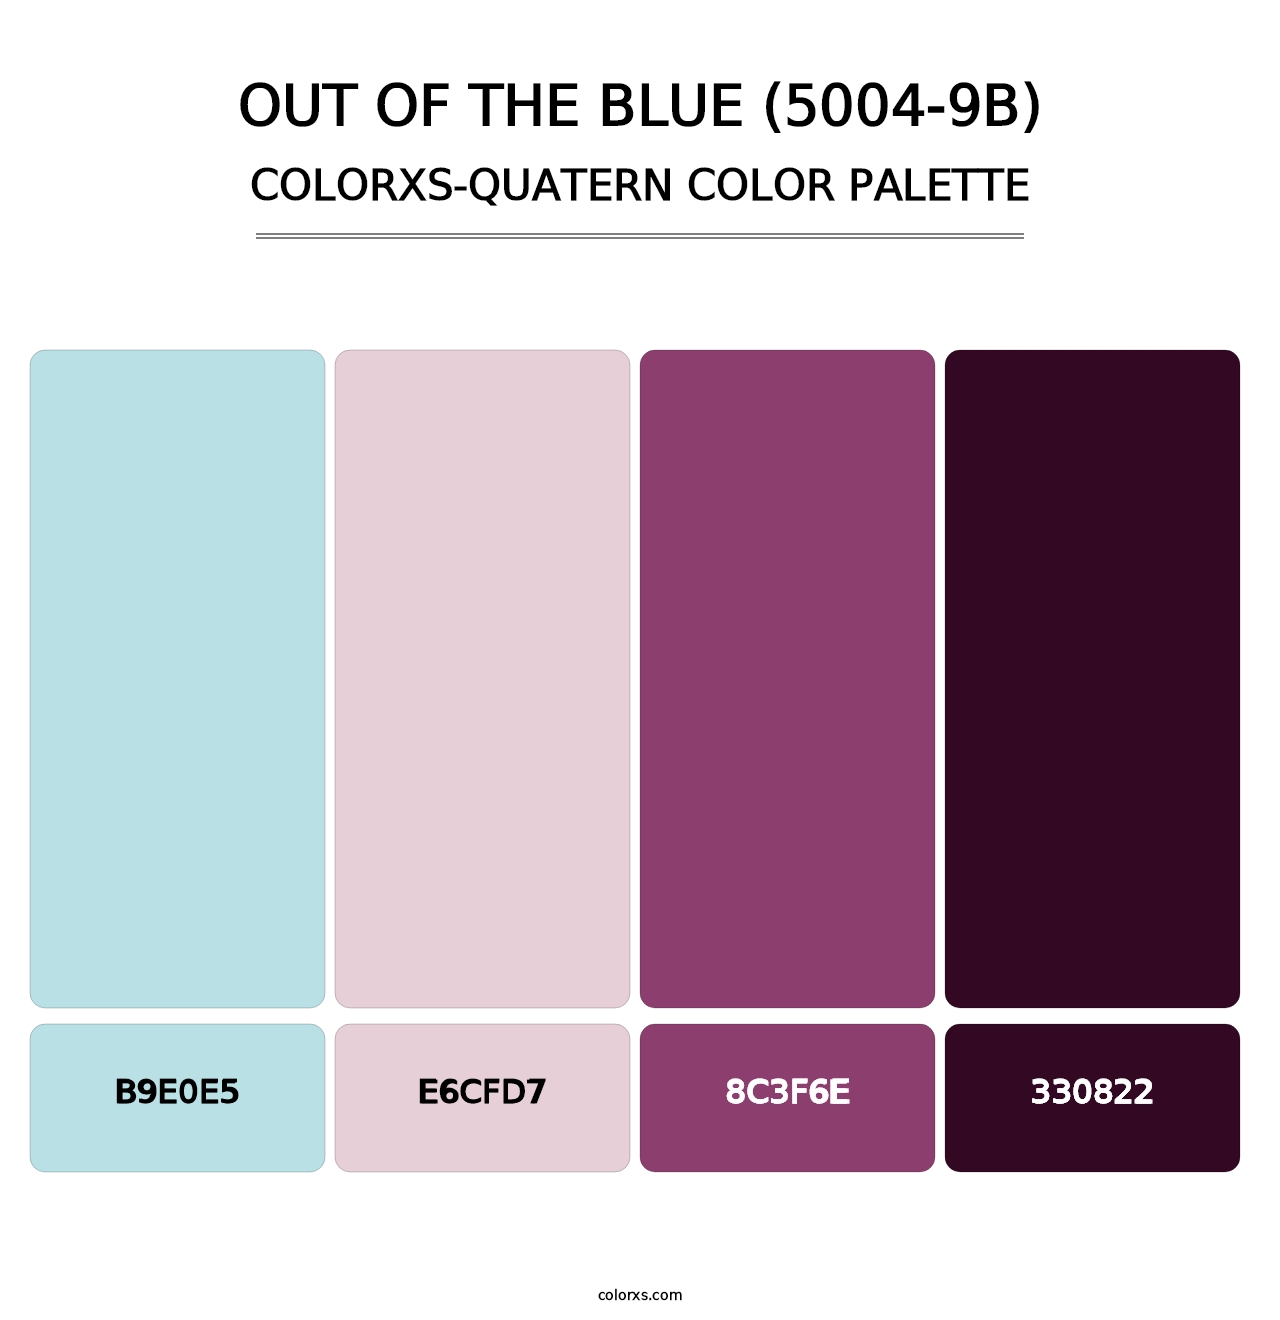 Out of the Blue (5004-9B) - Colorxs Quatern Palette